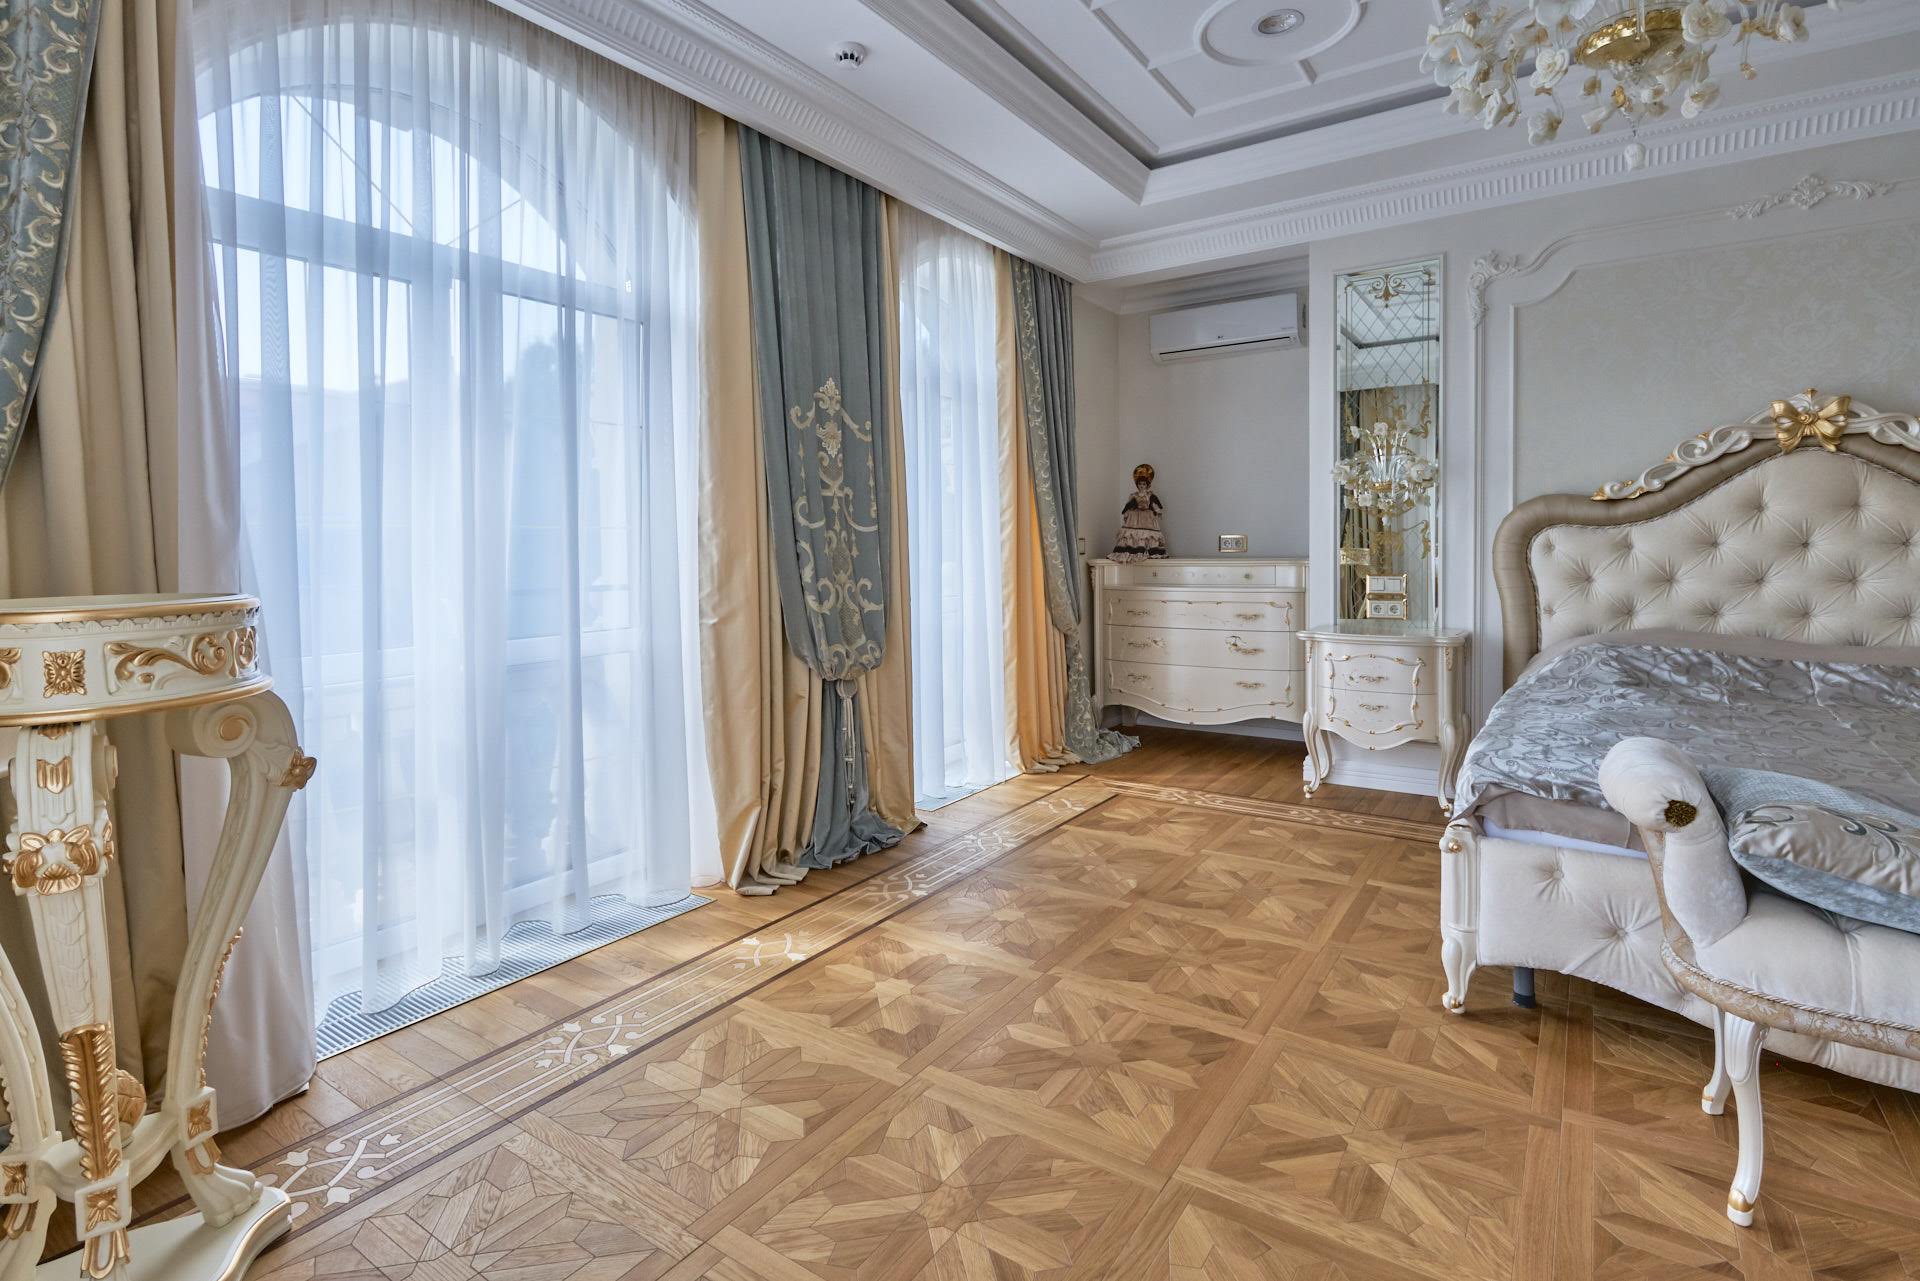 Bedroom in classic style